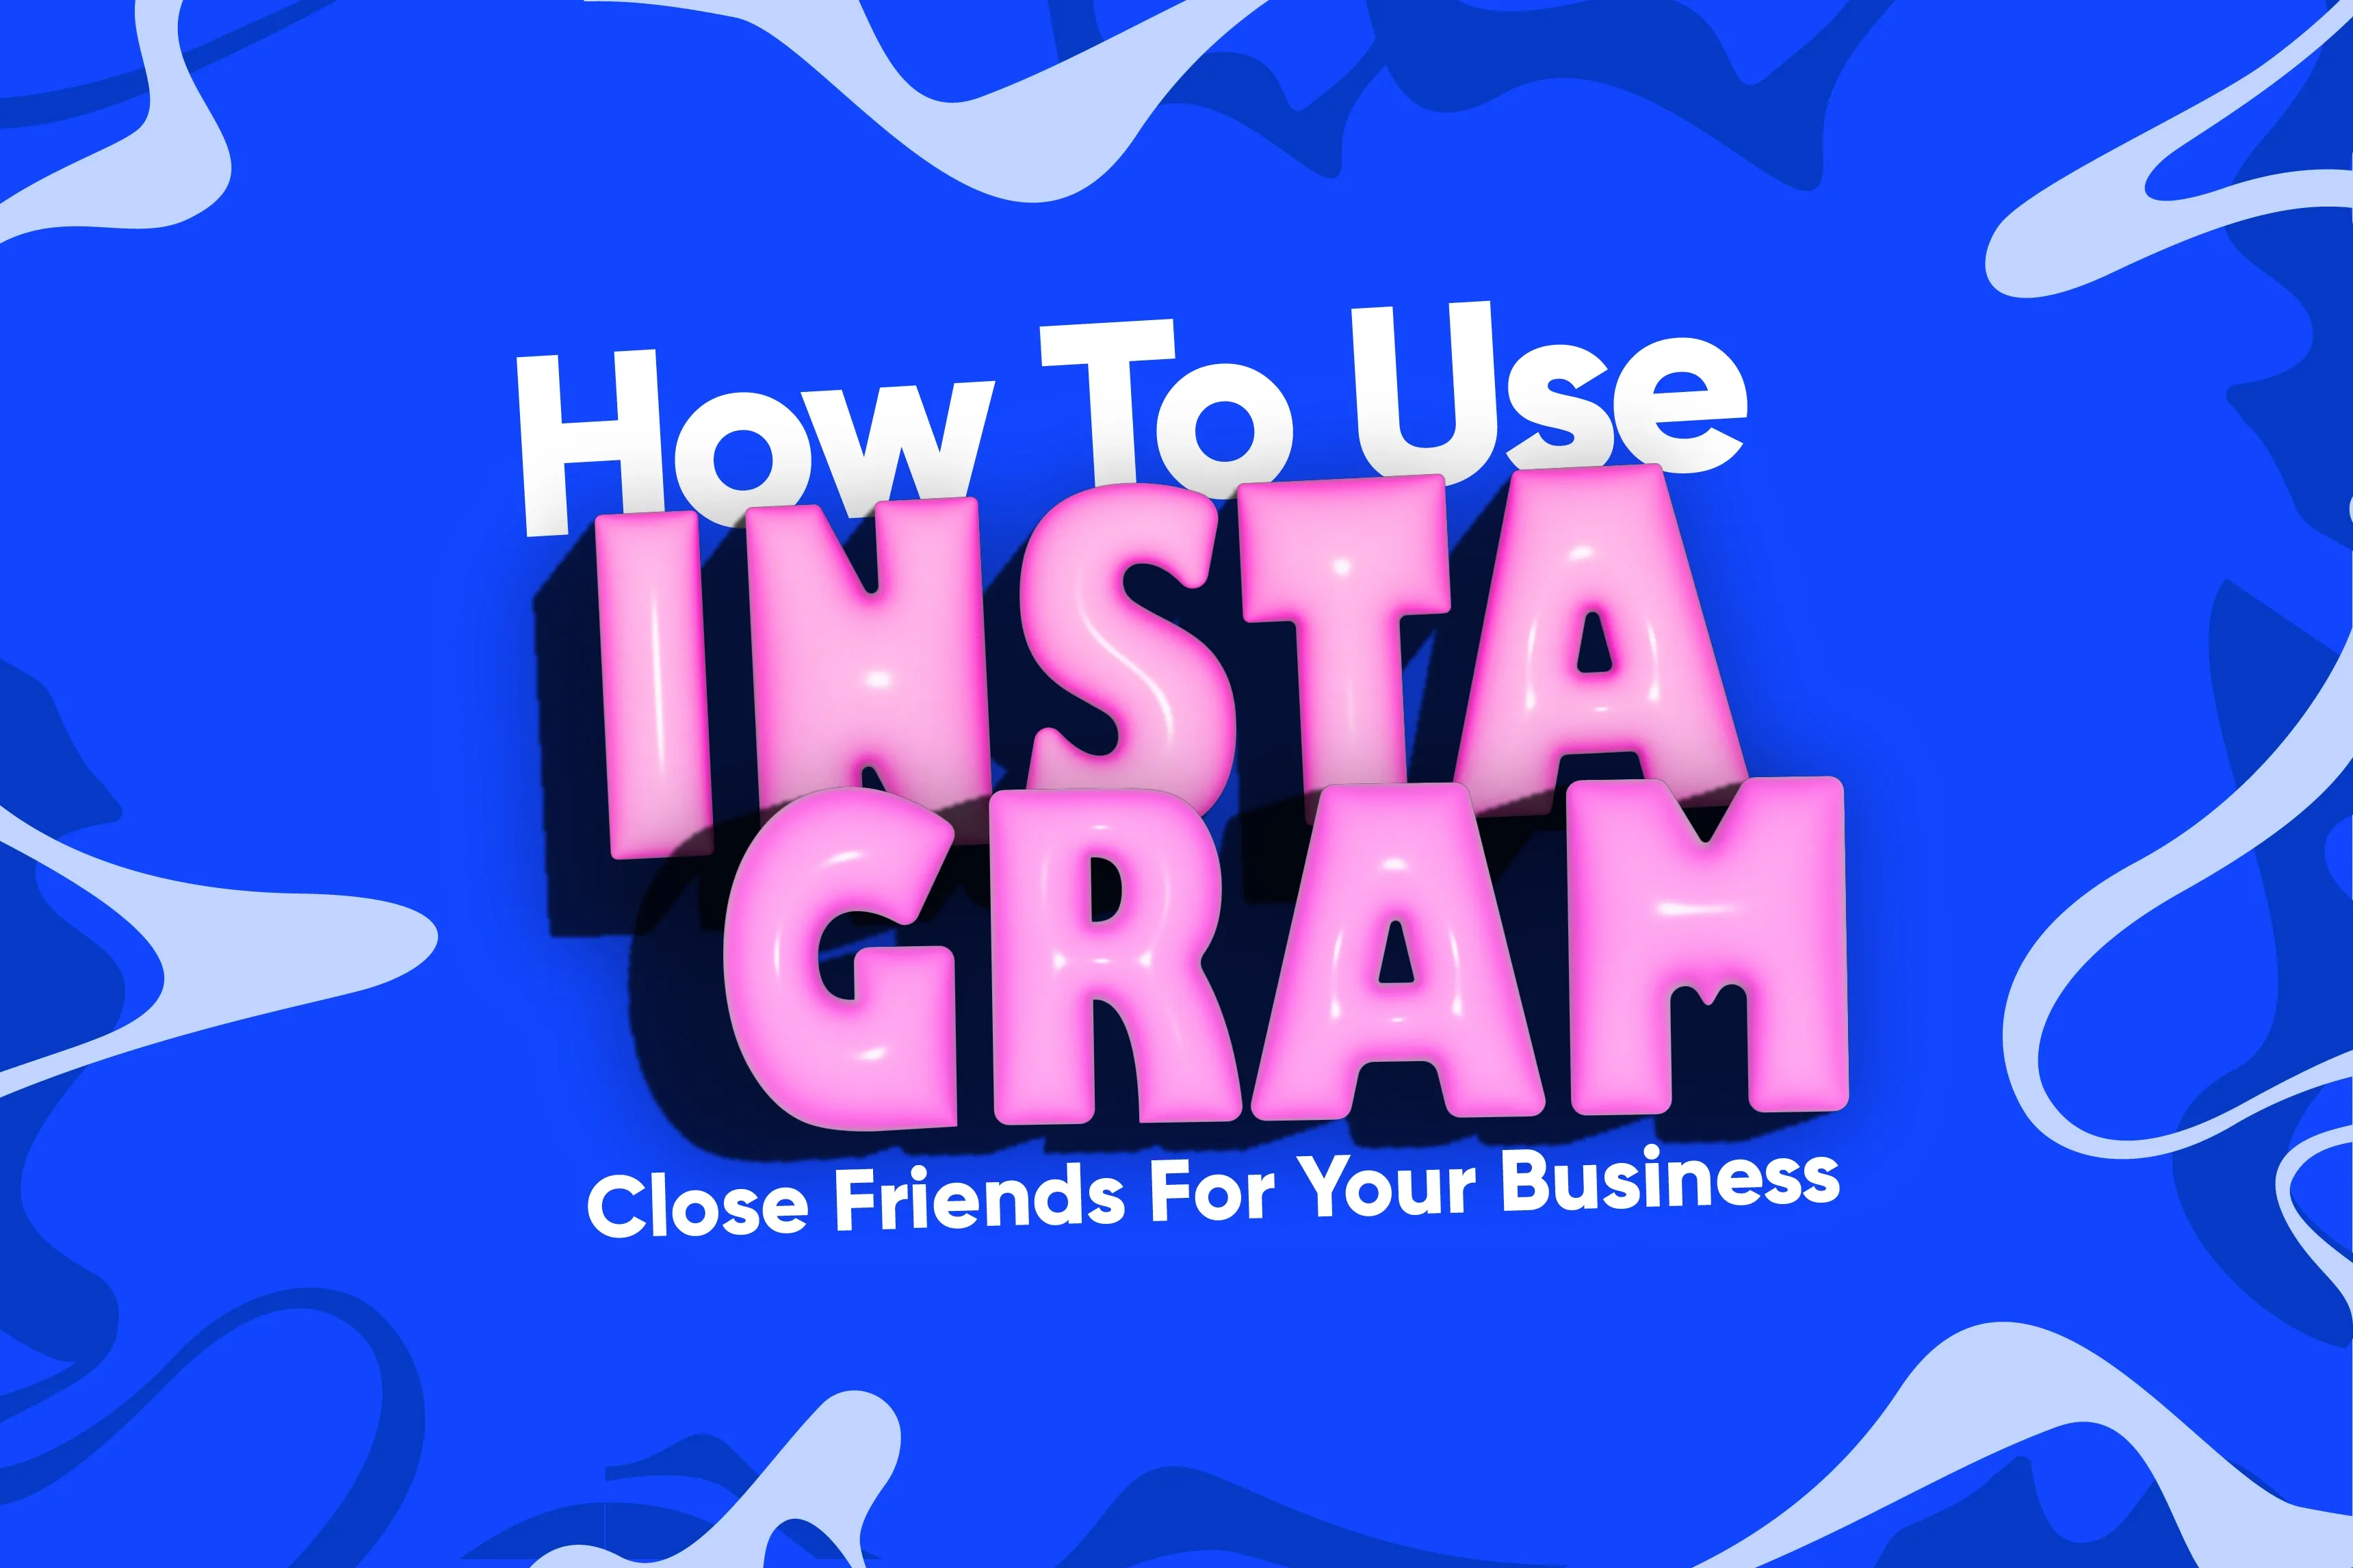 How To Use Instagram’s Close Friends For Your Business